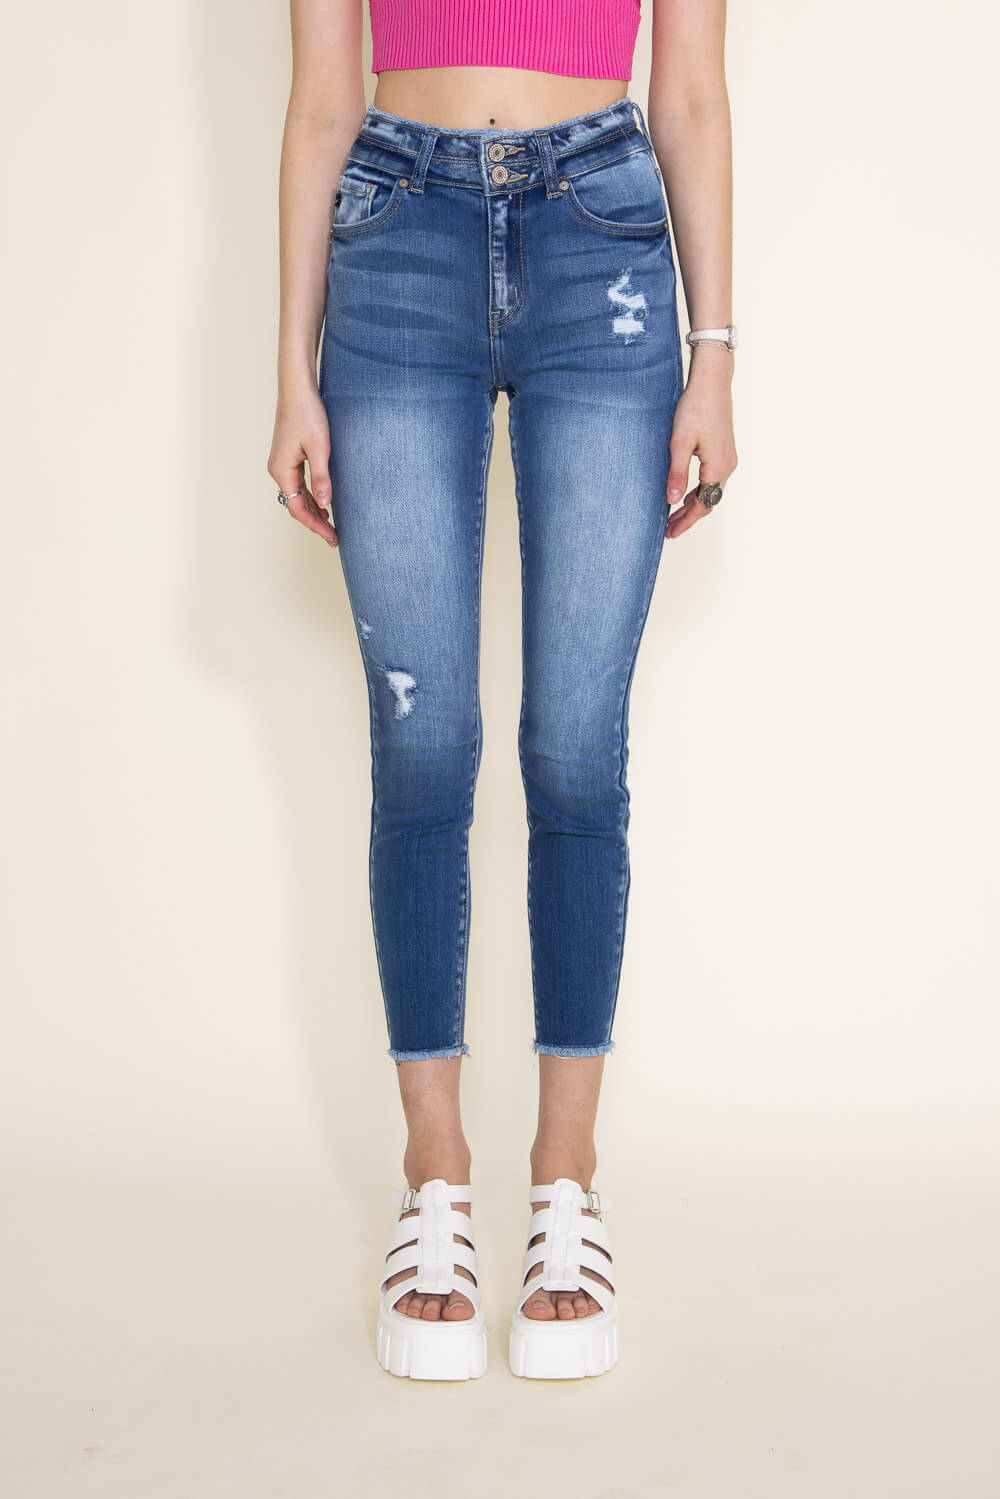 KanCan Danica High Rise Ankle Skinny Jeans for Women